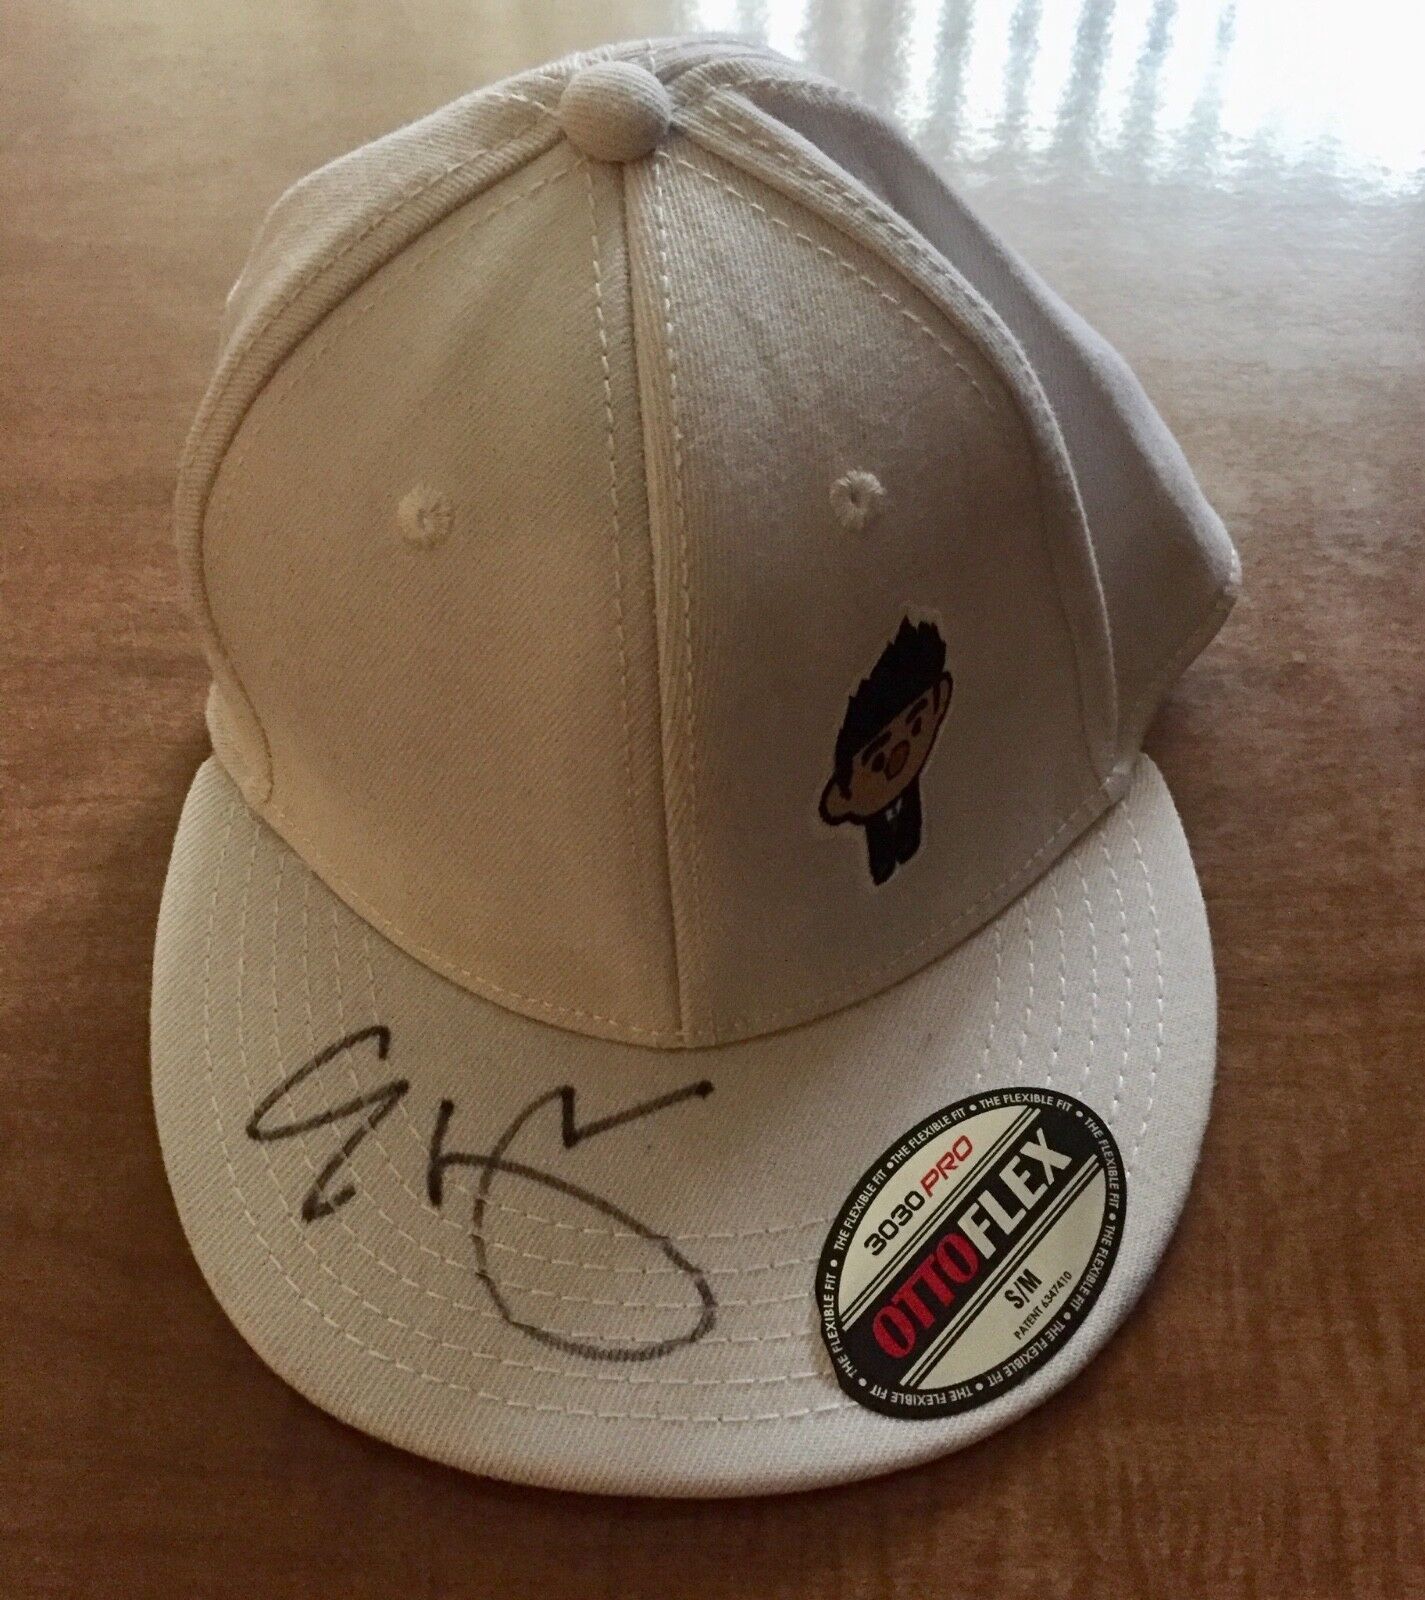 Autographed Hat - Name Unknown